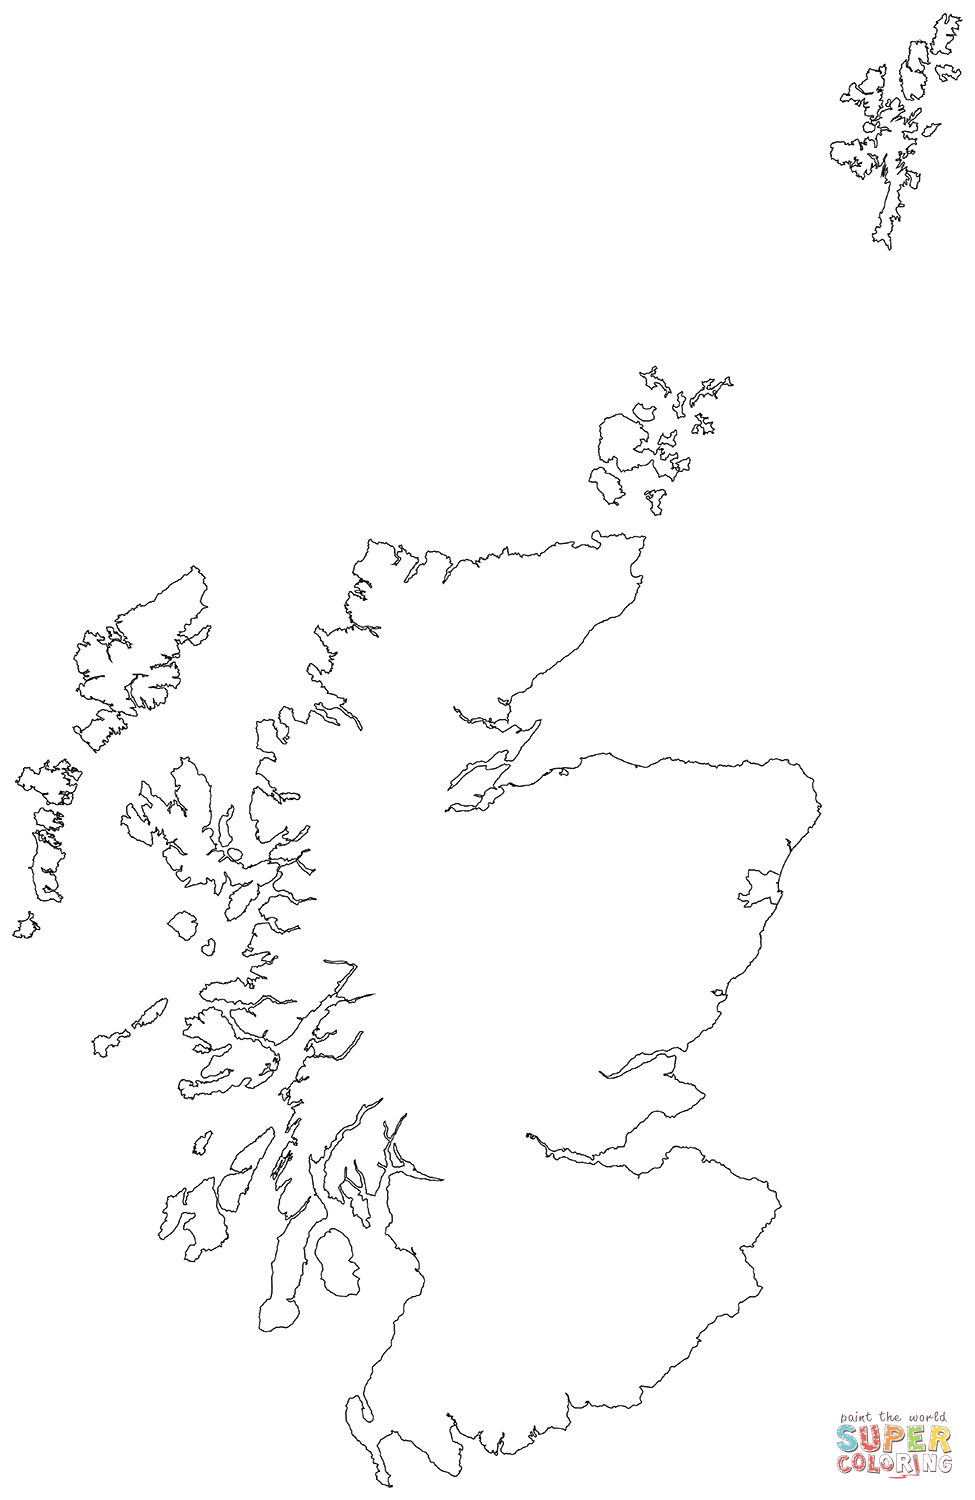 Outline map of scotland coloring page free printable coloring pages